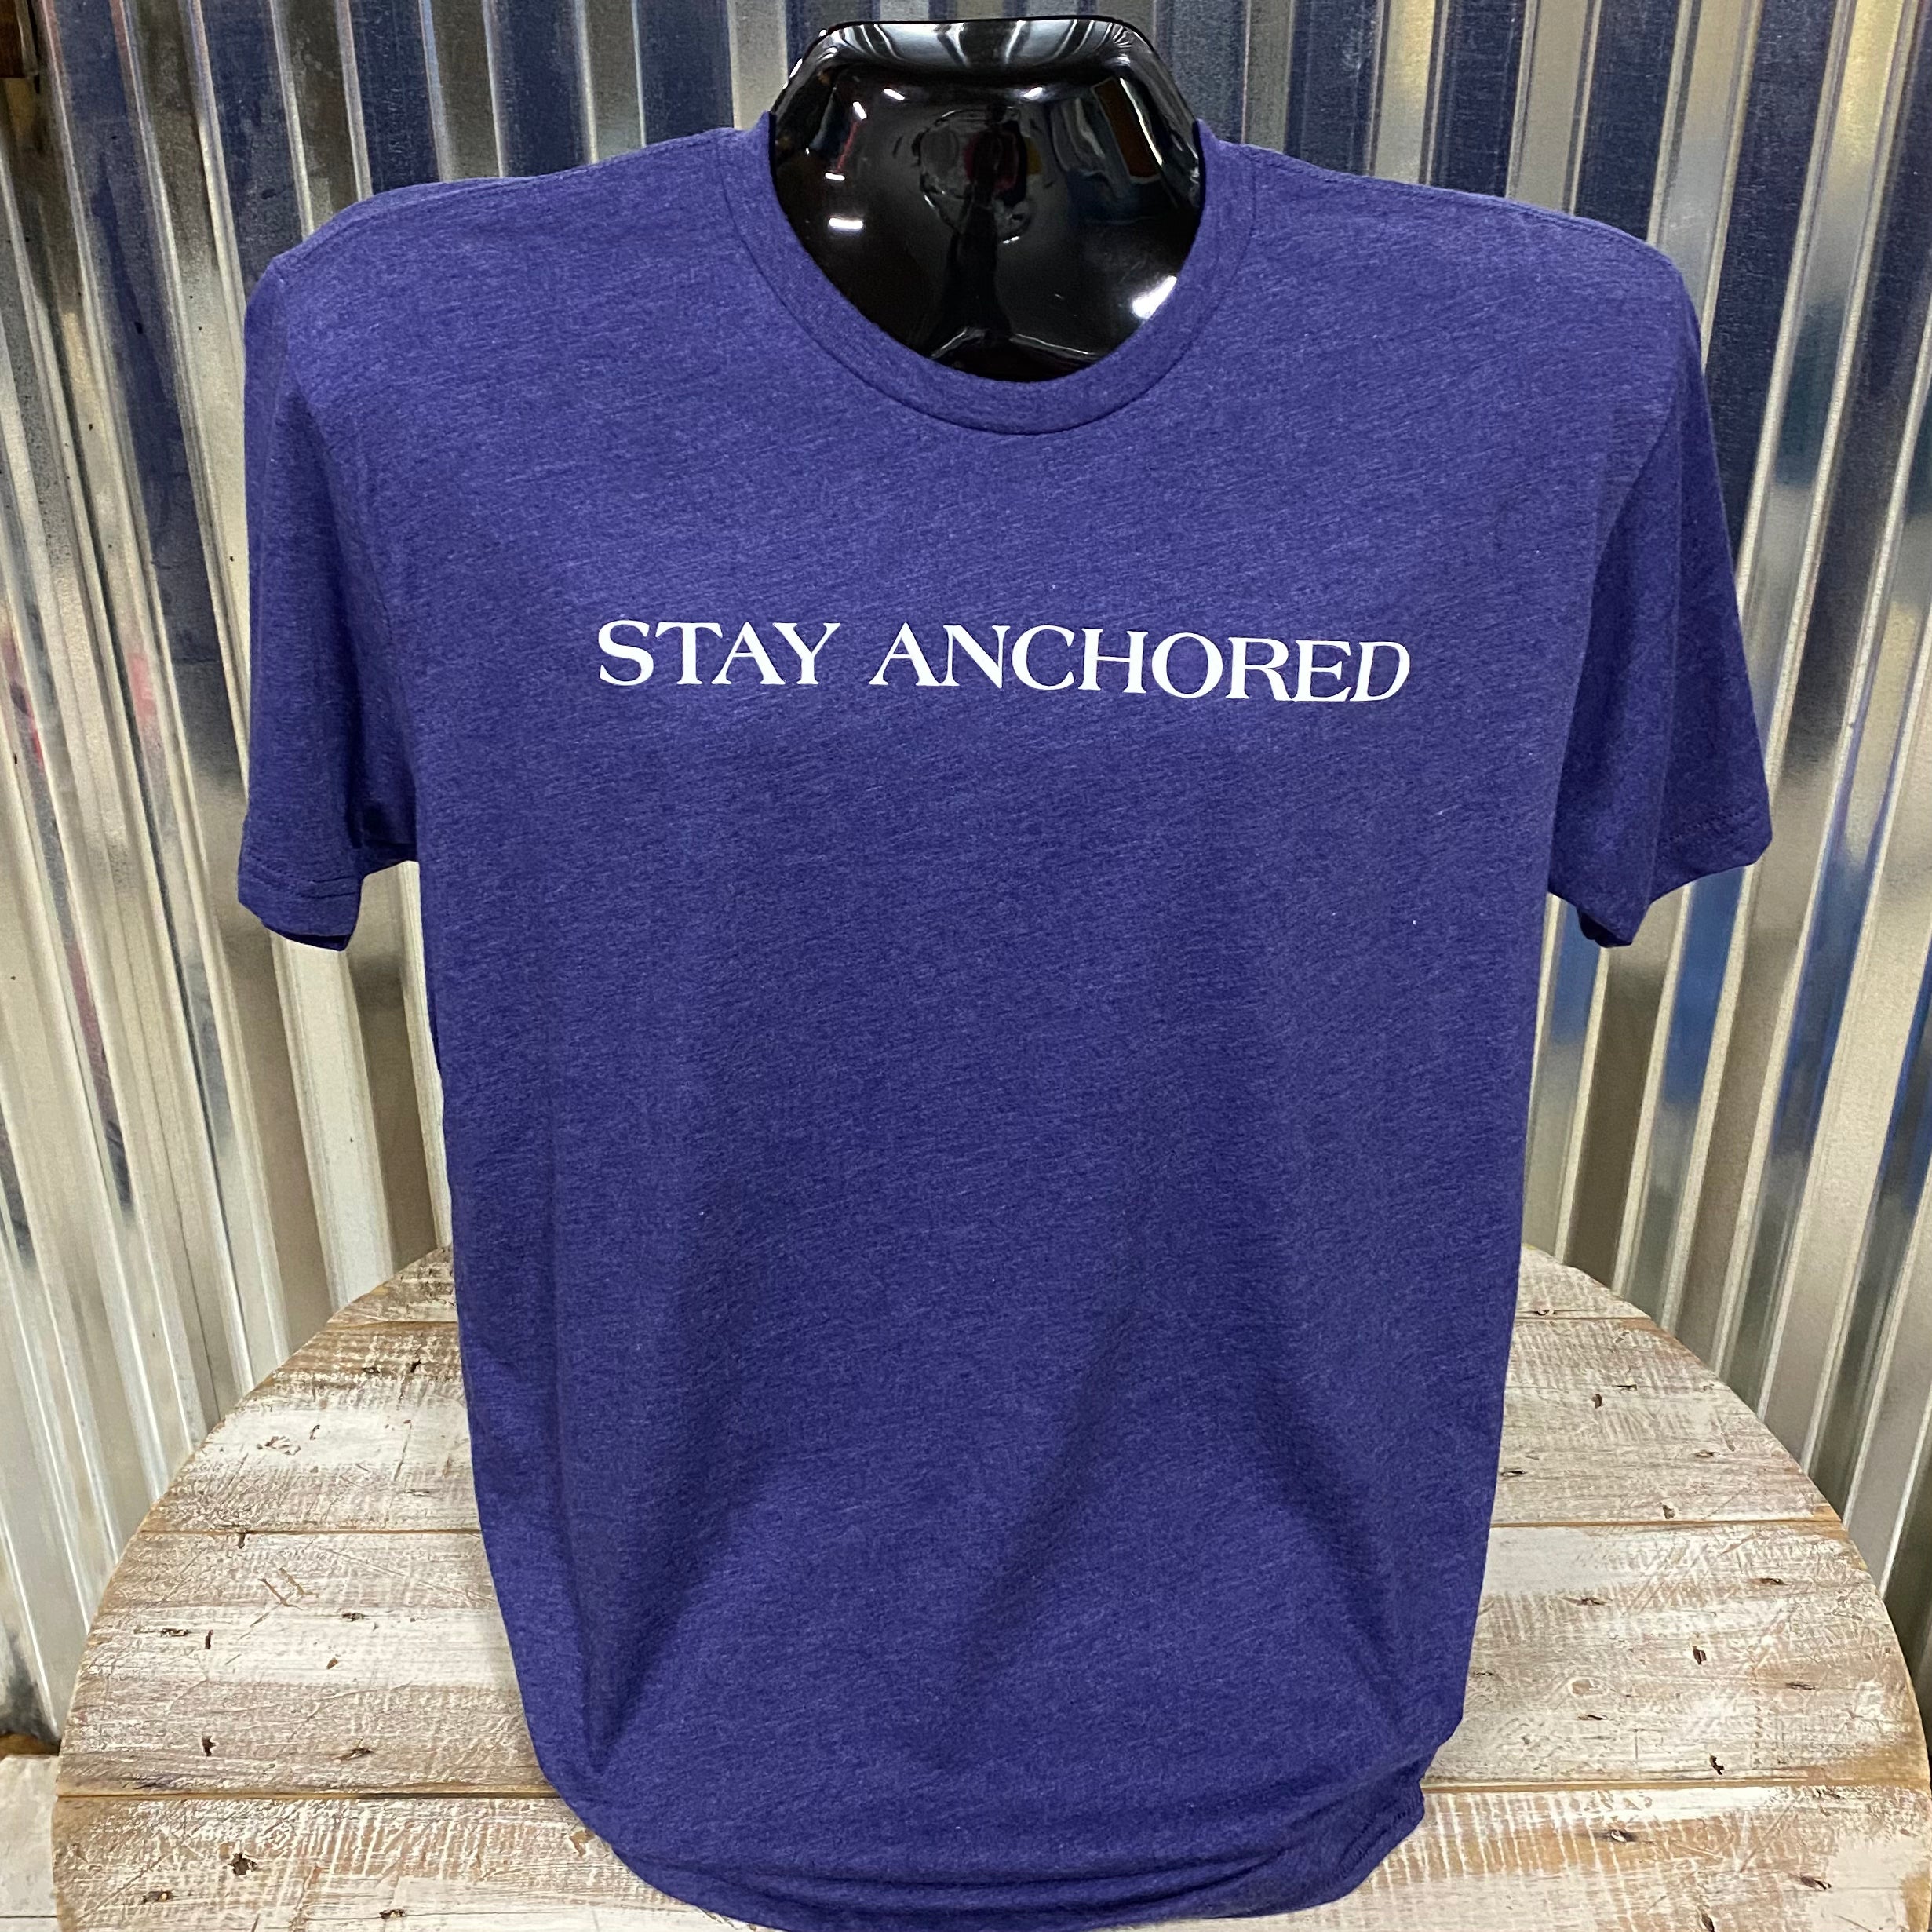 Short Sleeve Stay Anchored Tees